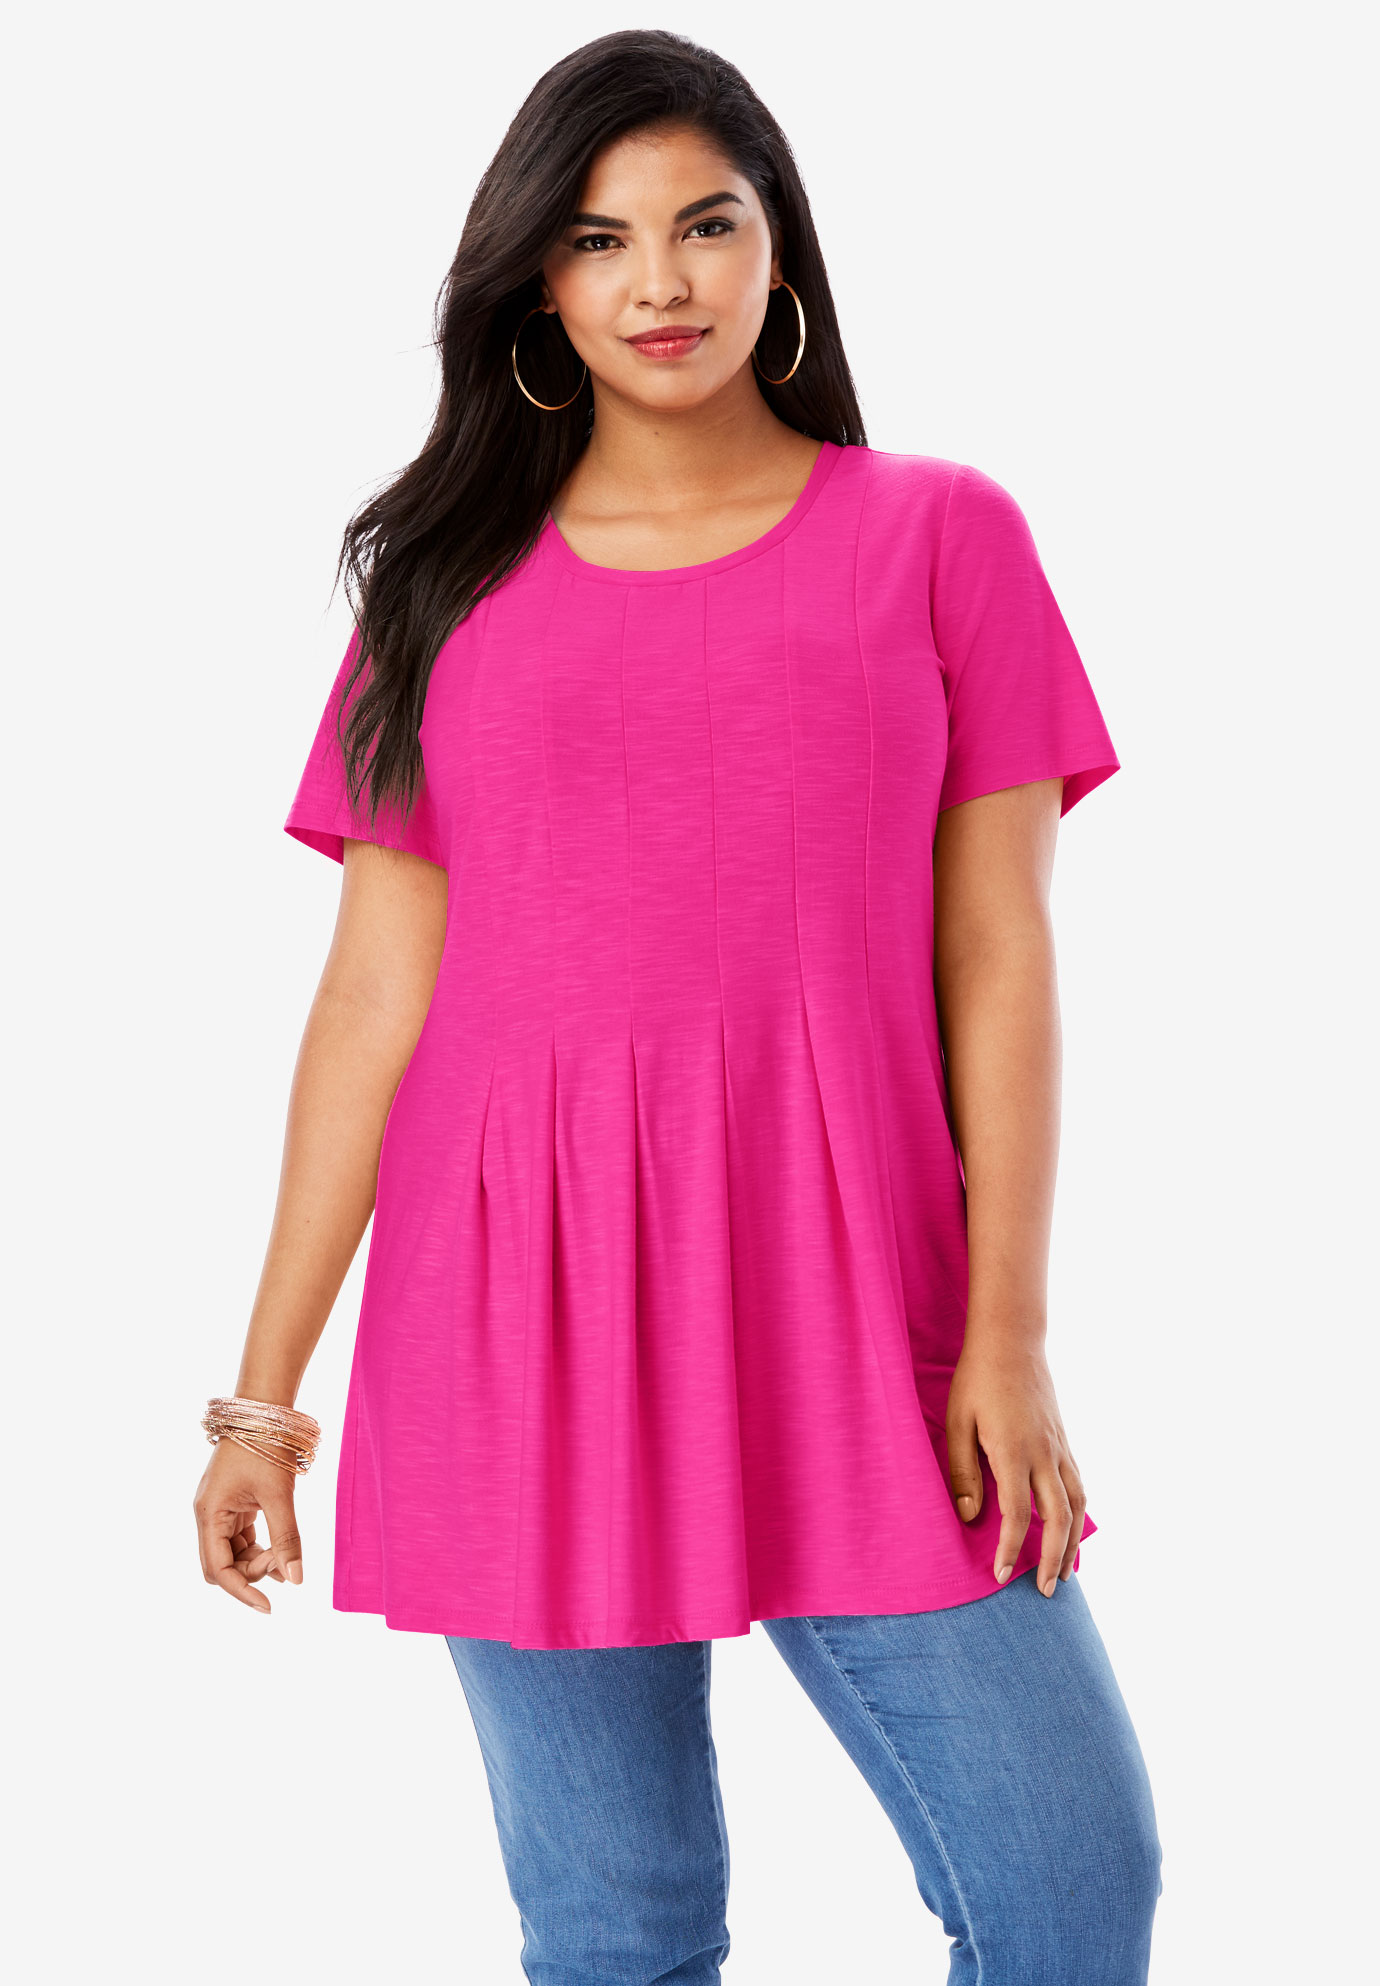 Pleated Tunic with Short Sleeves | Fullbeauty Outlet